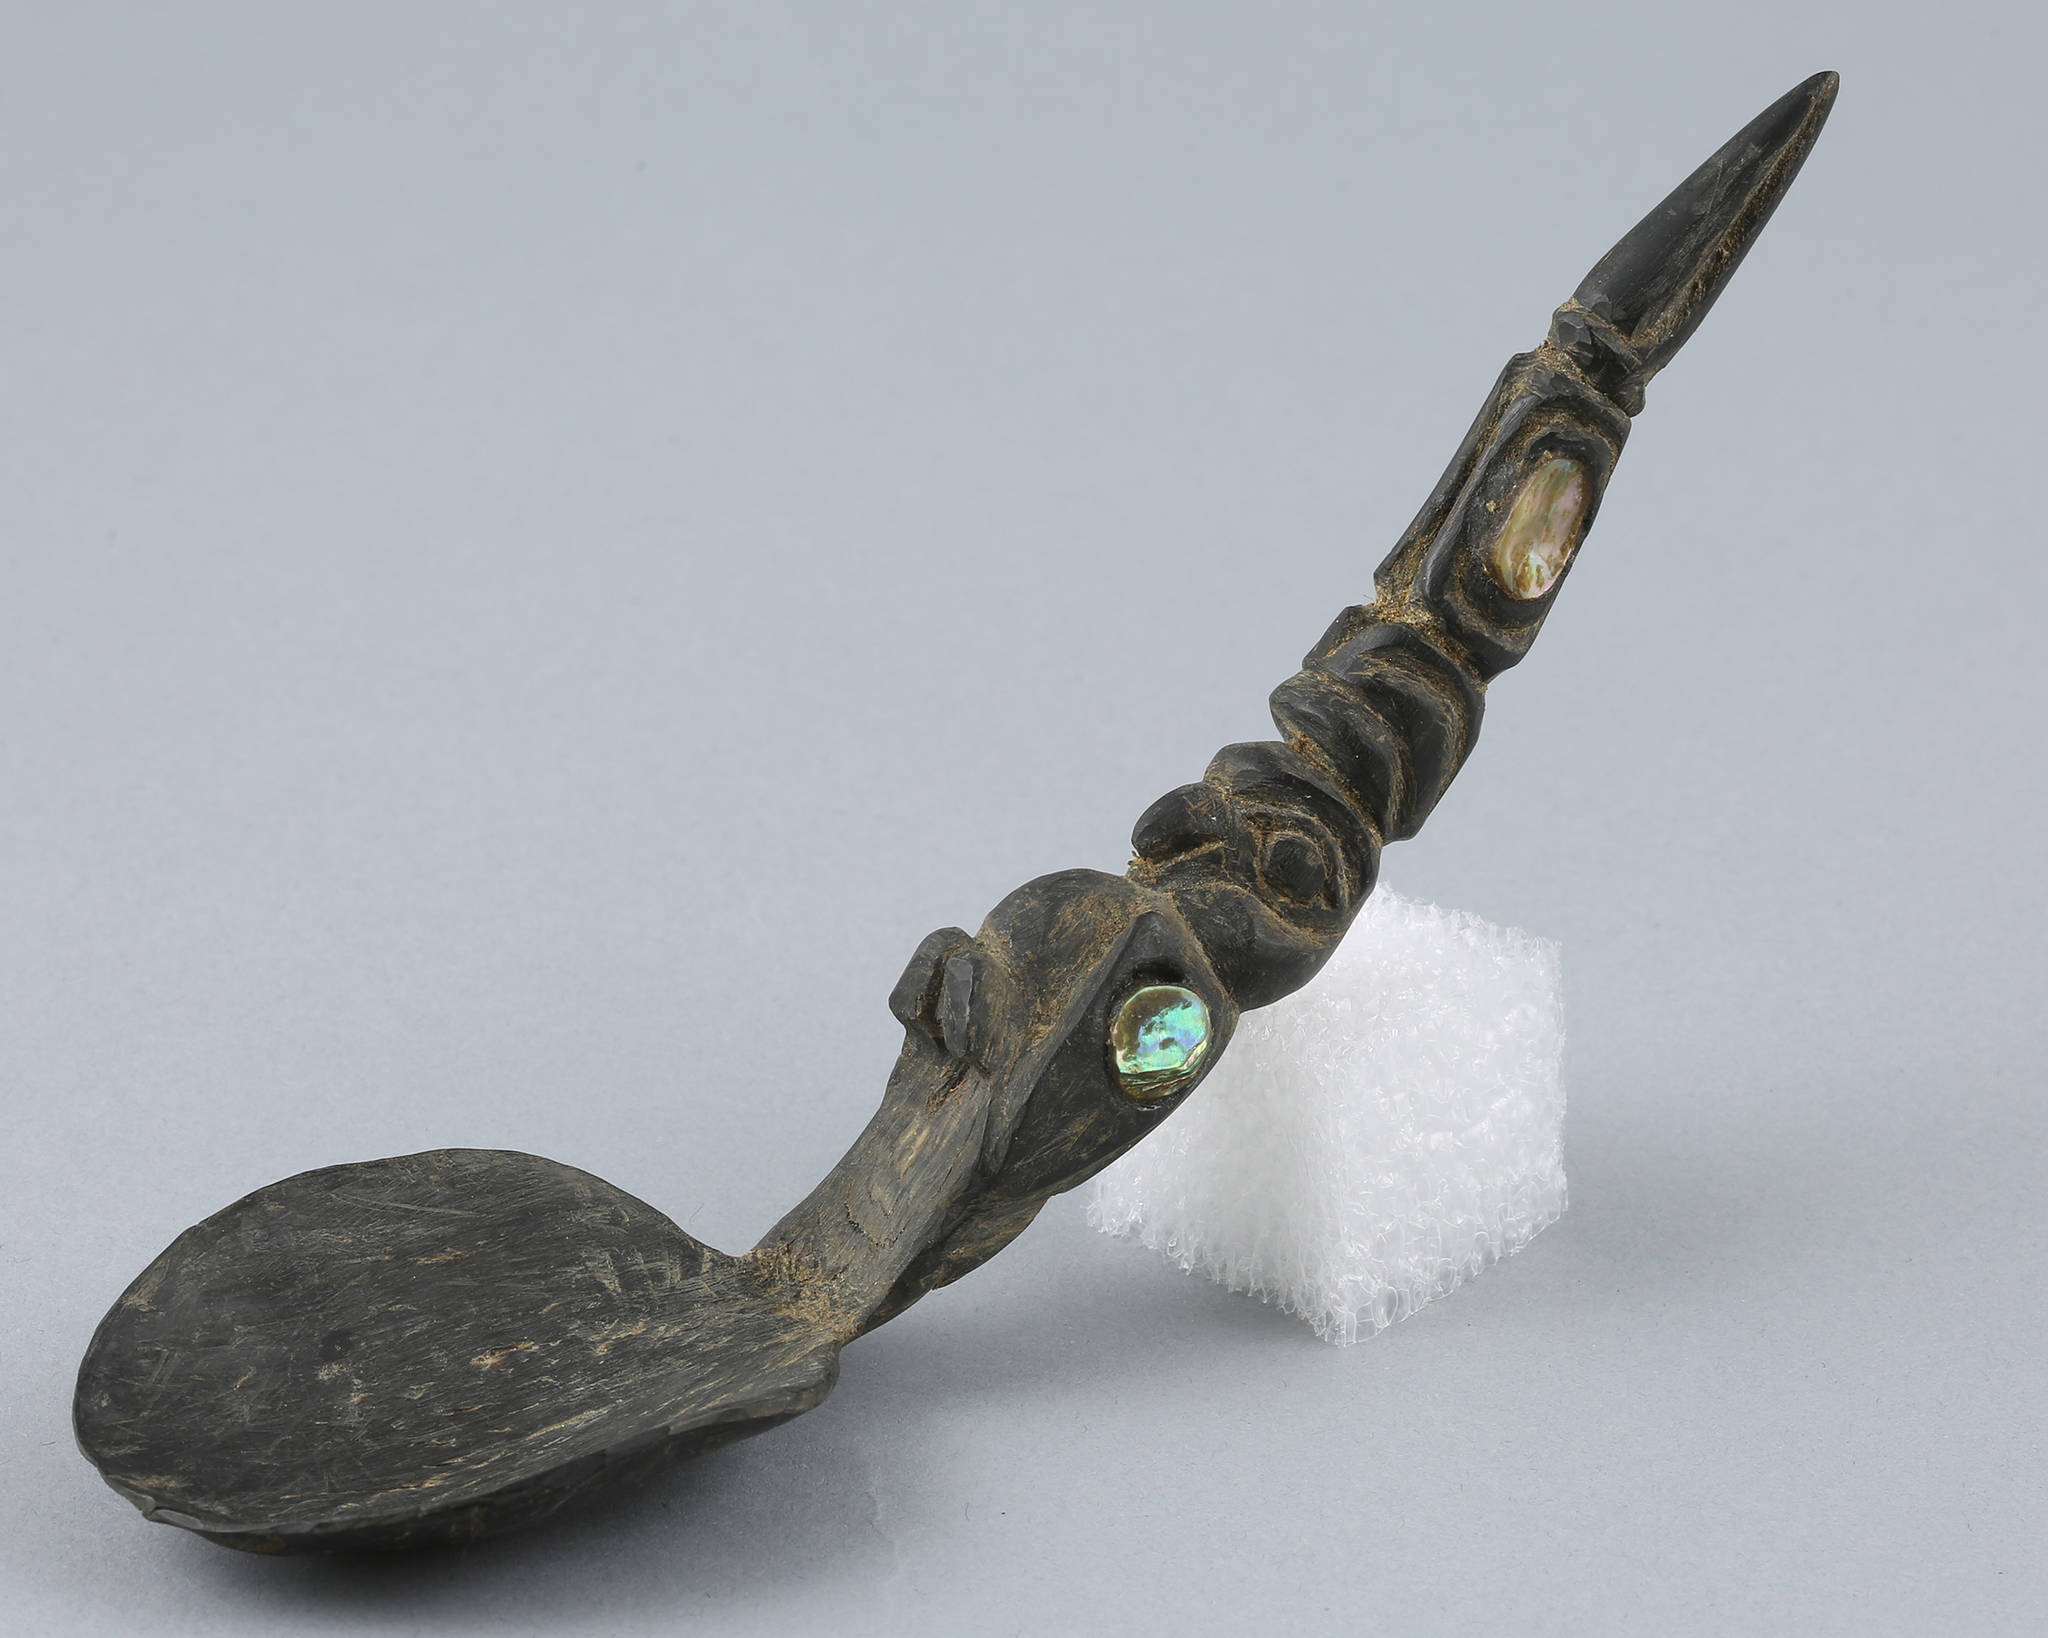 A carved goat horn spoon from the Sealaska Heritage Institute archive. Sealaska Heritage Institute artifact collection. All images are the property of the Sealaska Heritage Institute. Photo by Brian Wallace.